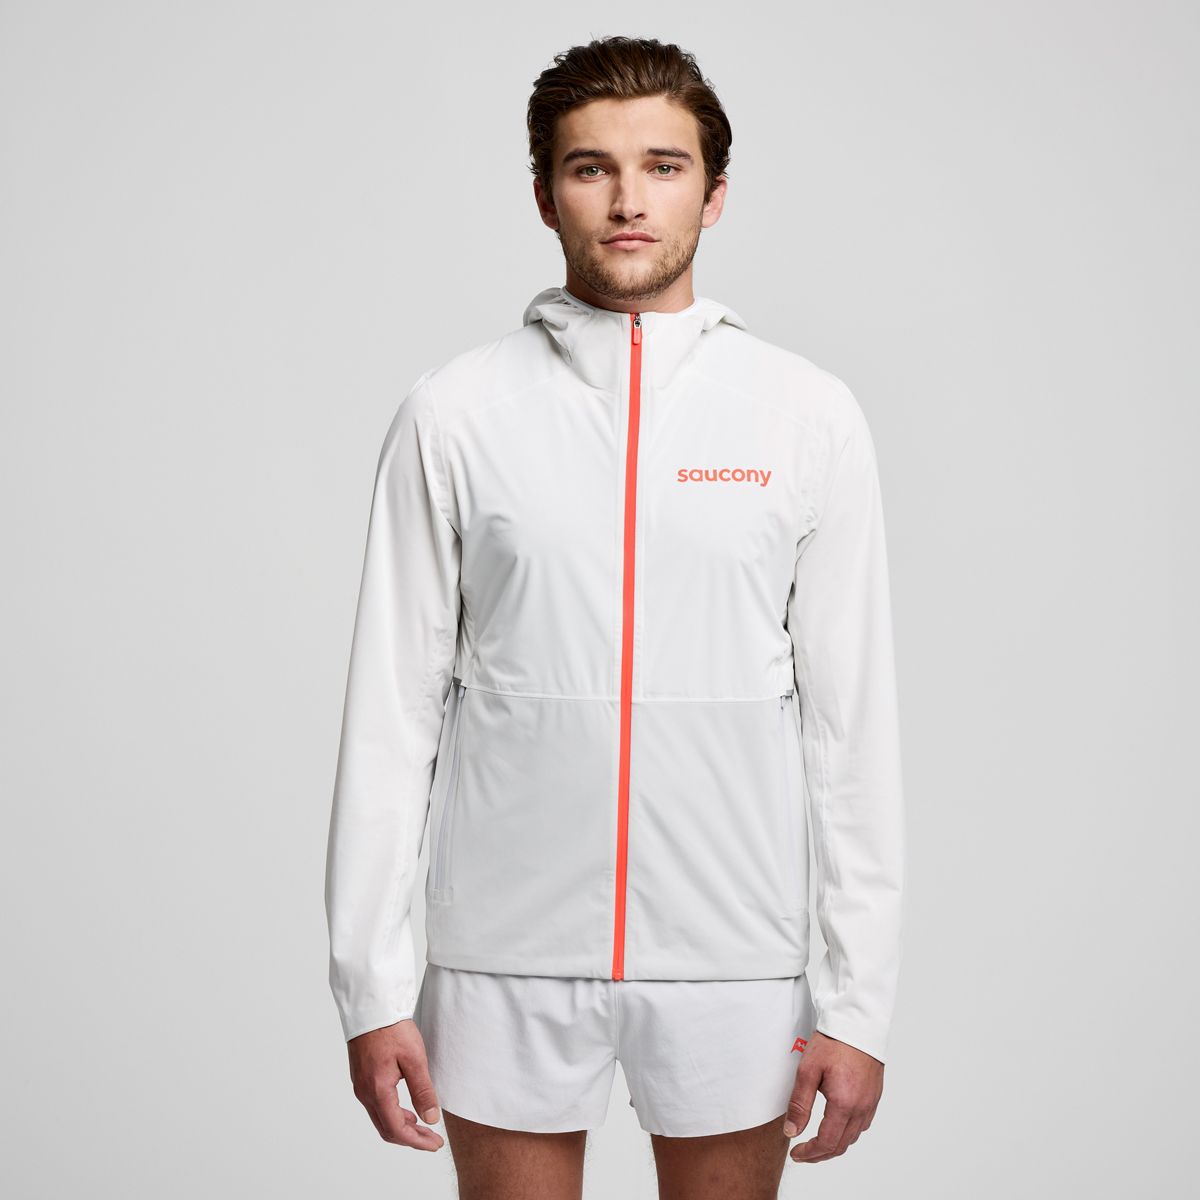 Reflective Athletic Jackets for Men, Women and Kids